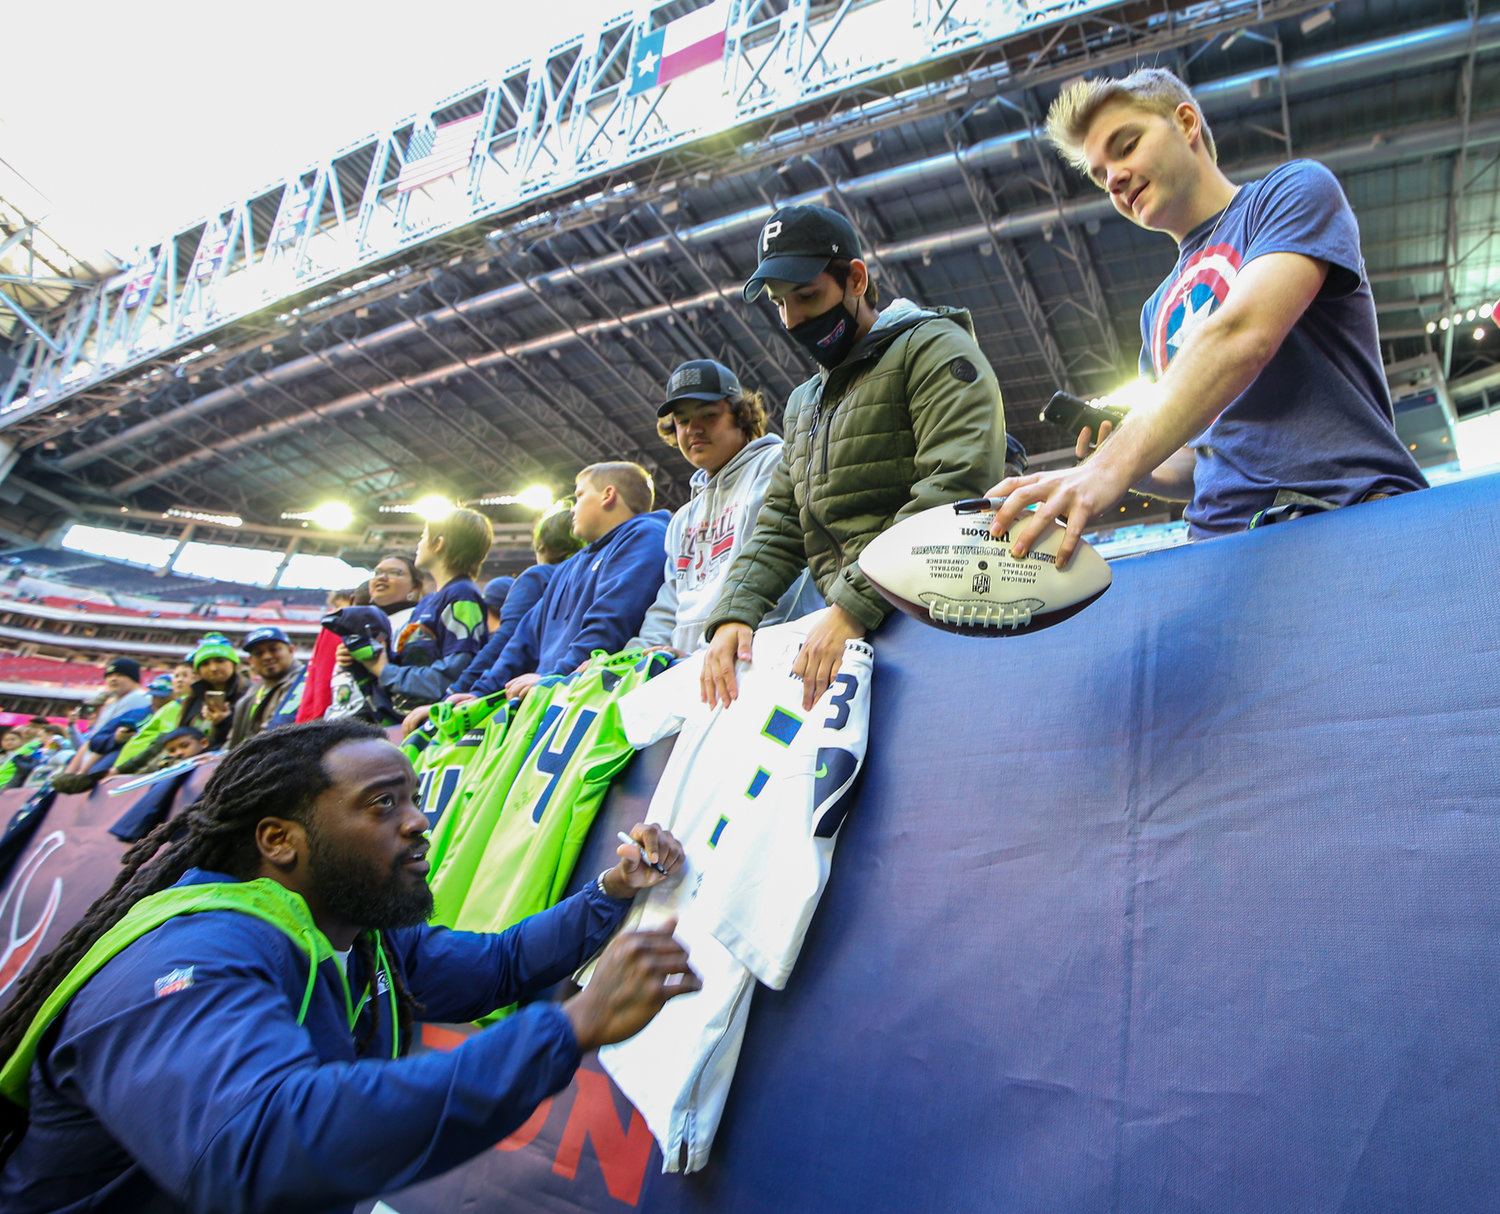 Seattle running back Alex Collins (41) signs souvenirs for Seahawks fans before the start of an NFL game between the Seahawks and the Texans on December 12, 2021 in Houston, Texas.